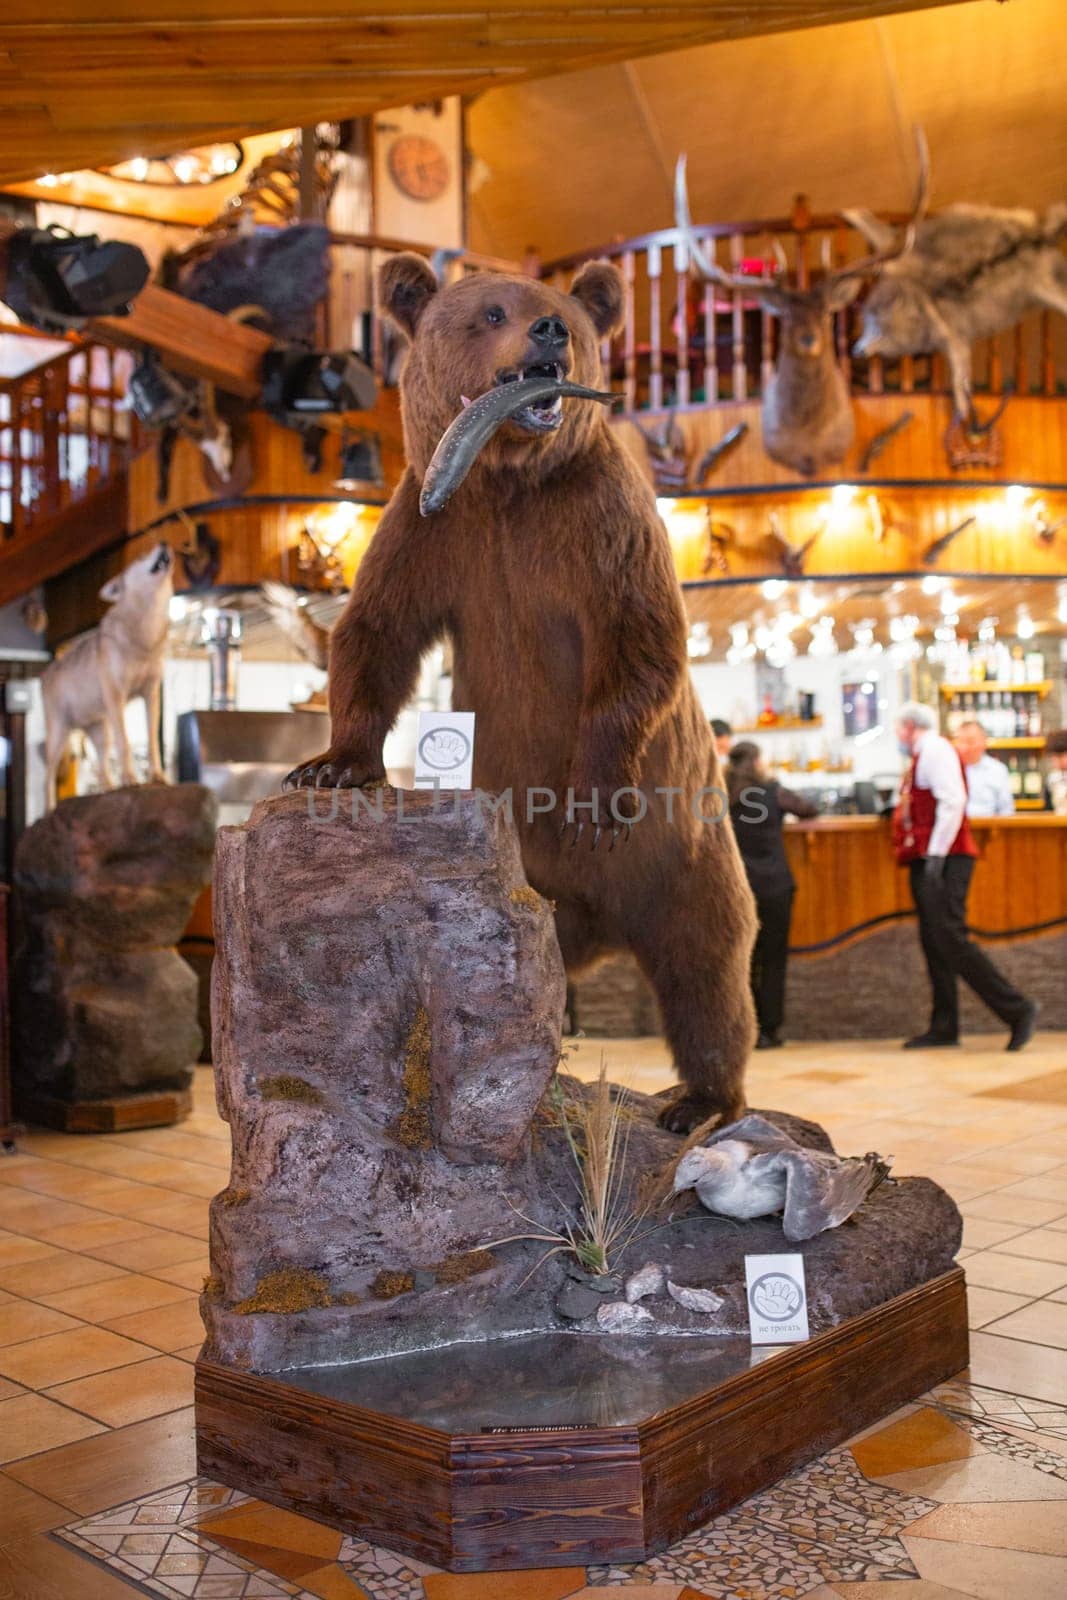 Stuffed brown bear with fish in mouth in cozy lodge with wood walls and fireplace. by Pukhovskiy